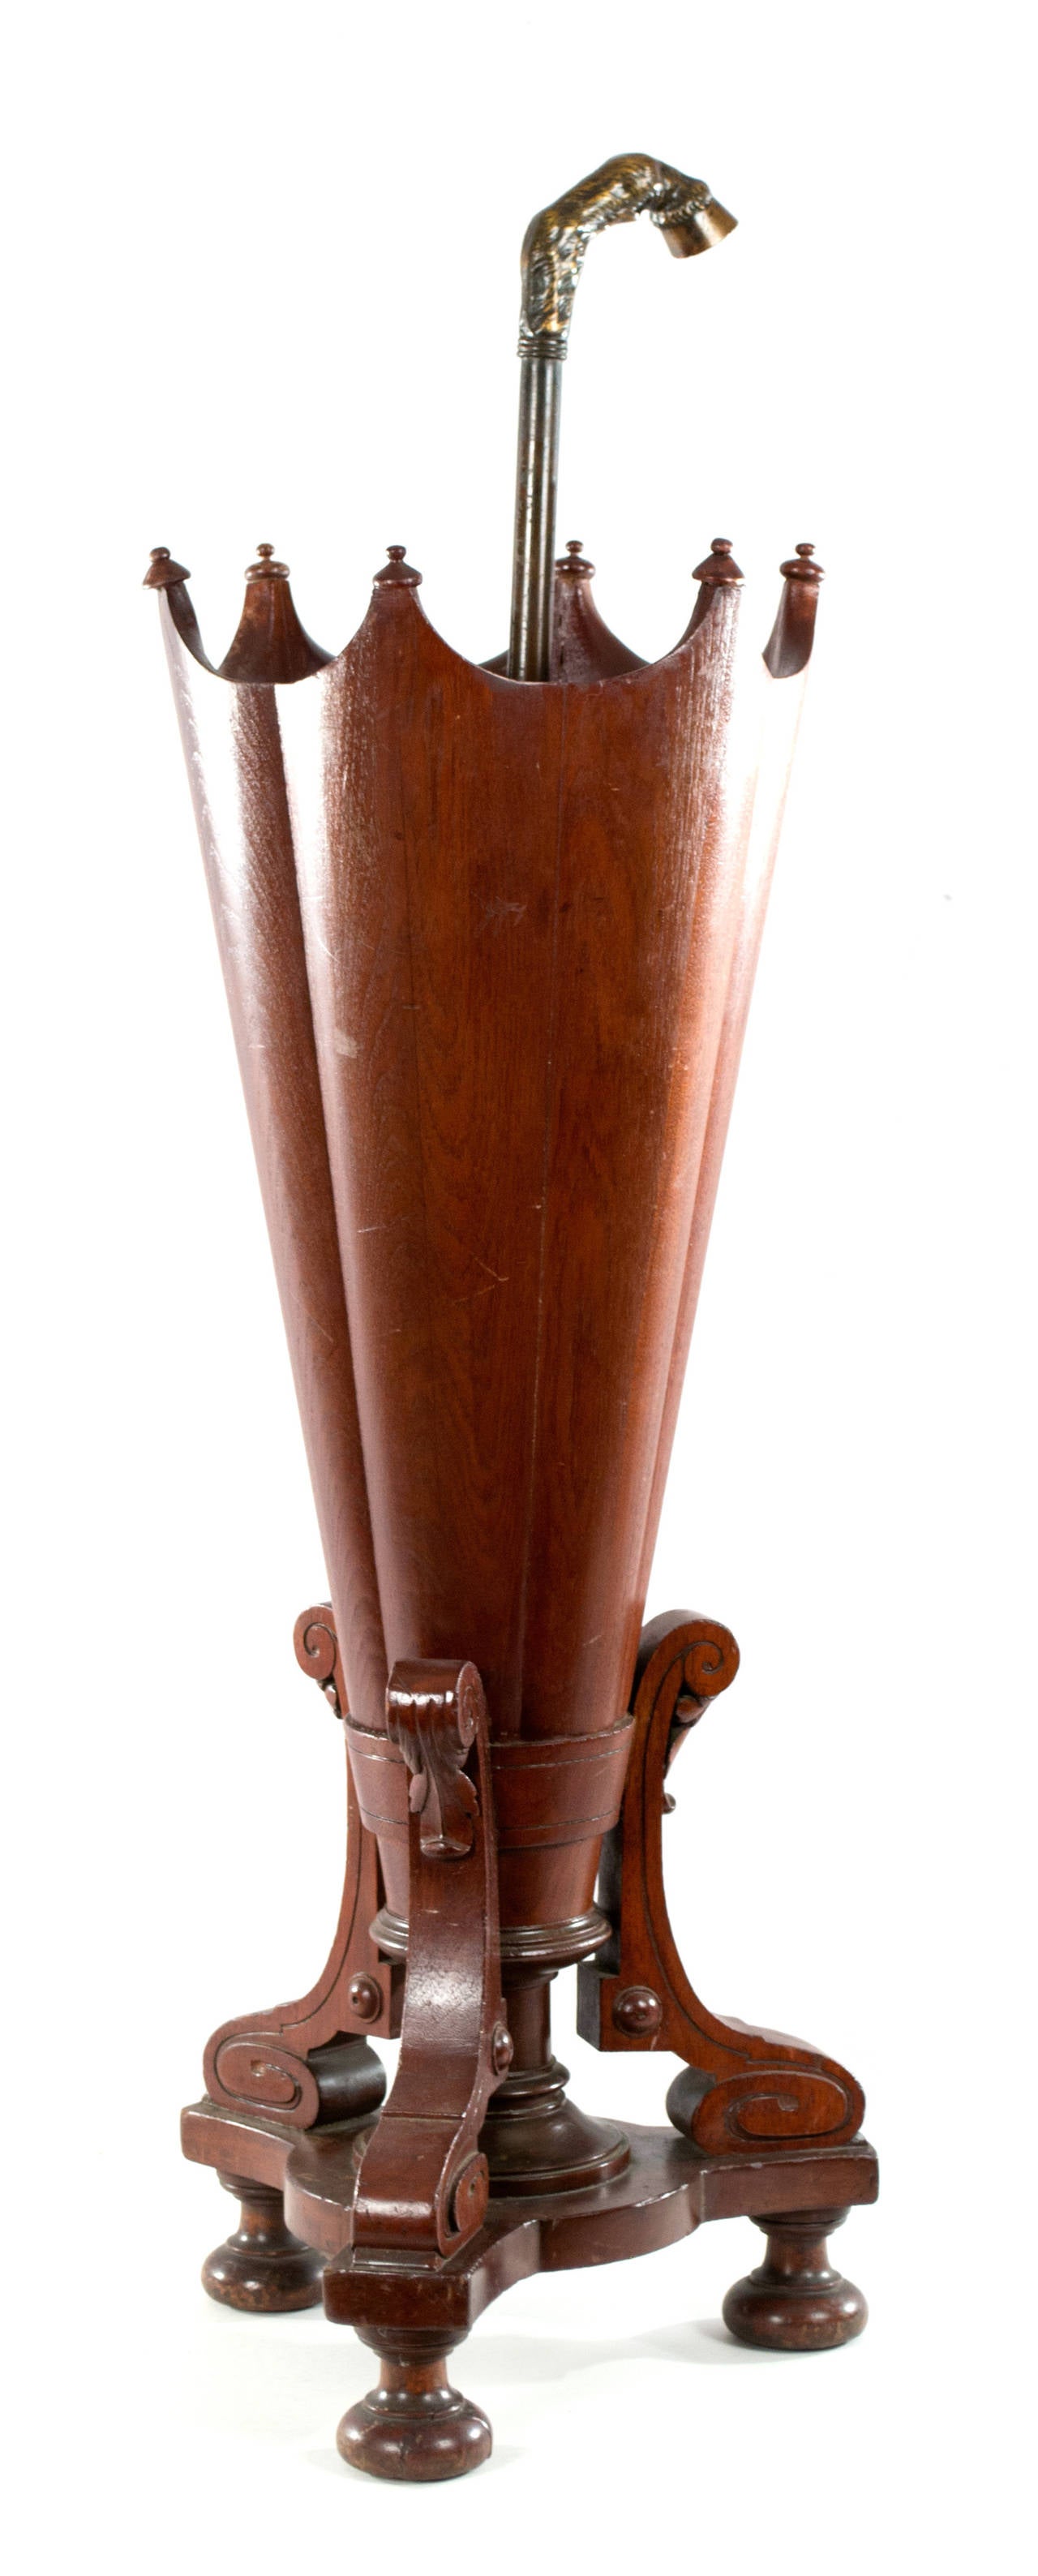 An American, turn-of-the-century, carved mahogany umbrella stand in the shape of an upturned umbrella. The handle of the umbrella is a beautifully sculpted bronze goat hoof.